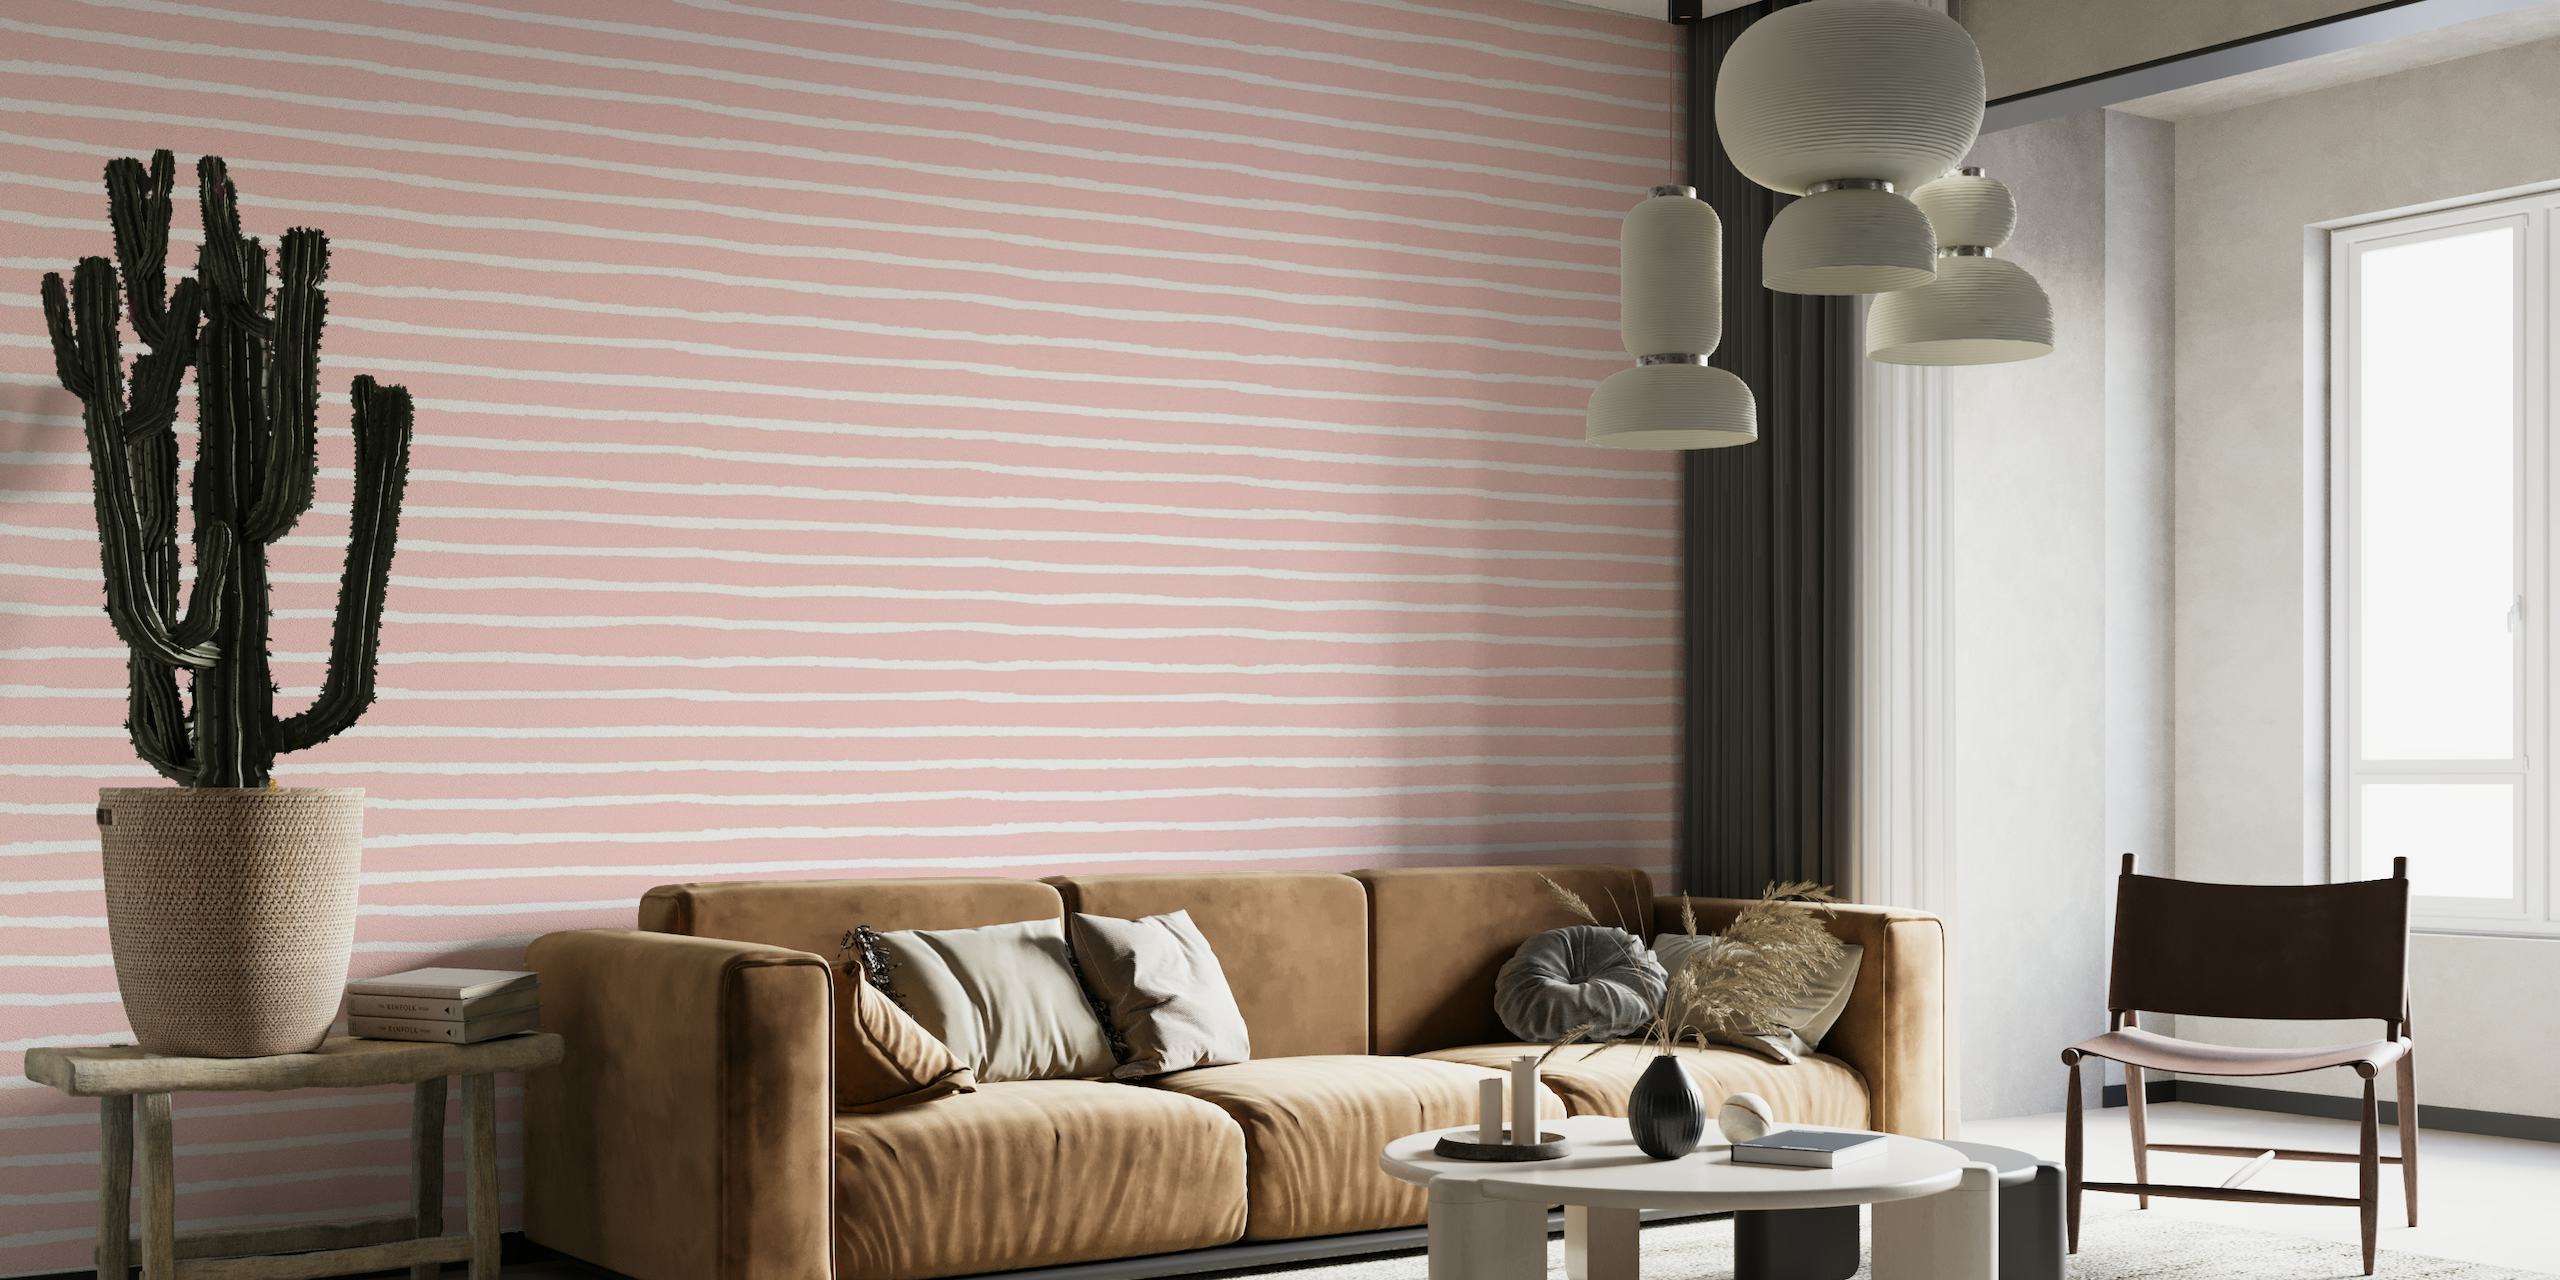 Abstract Stripes_pink behang